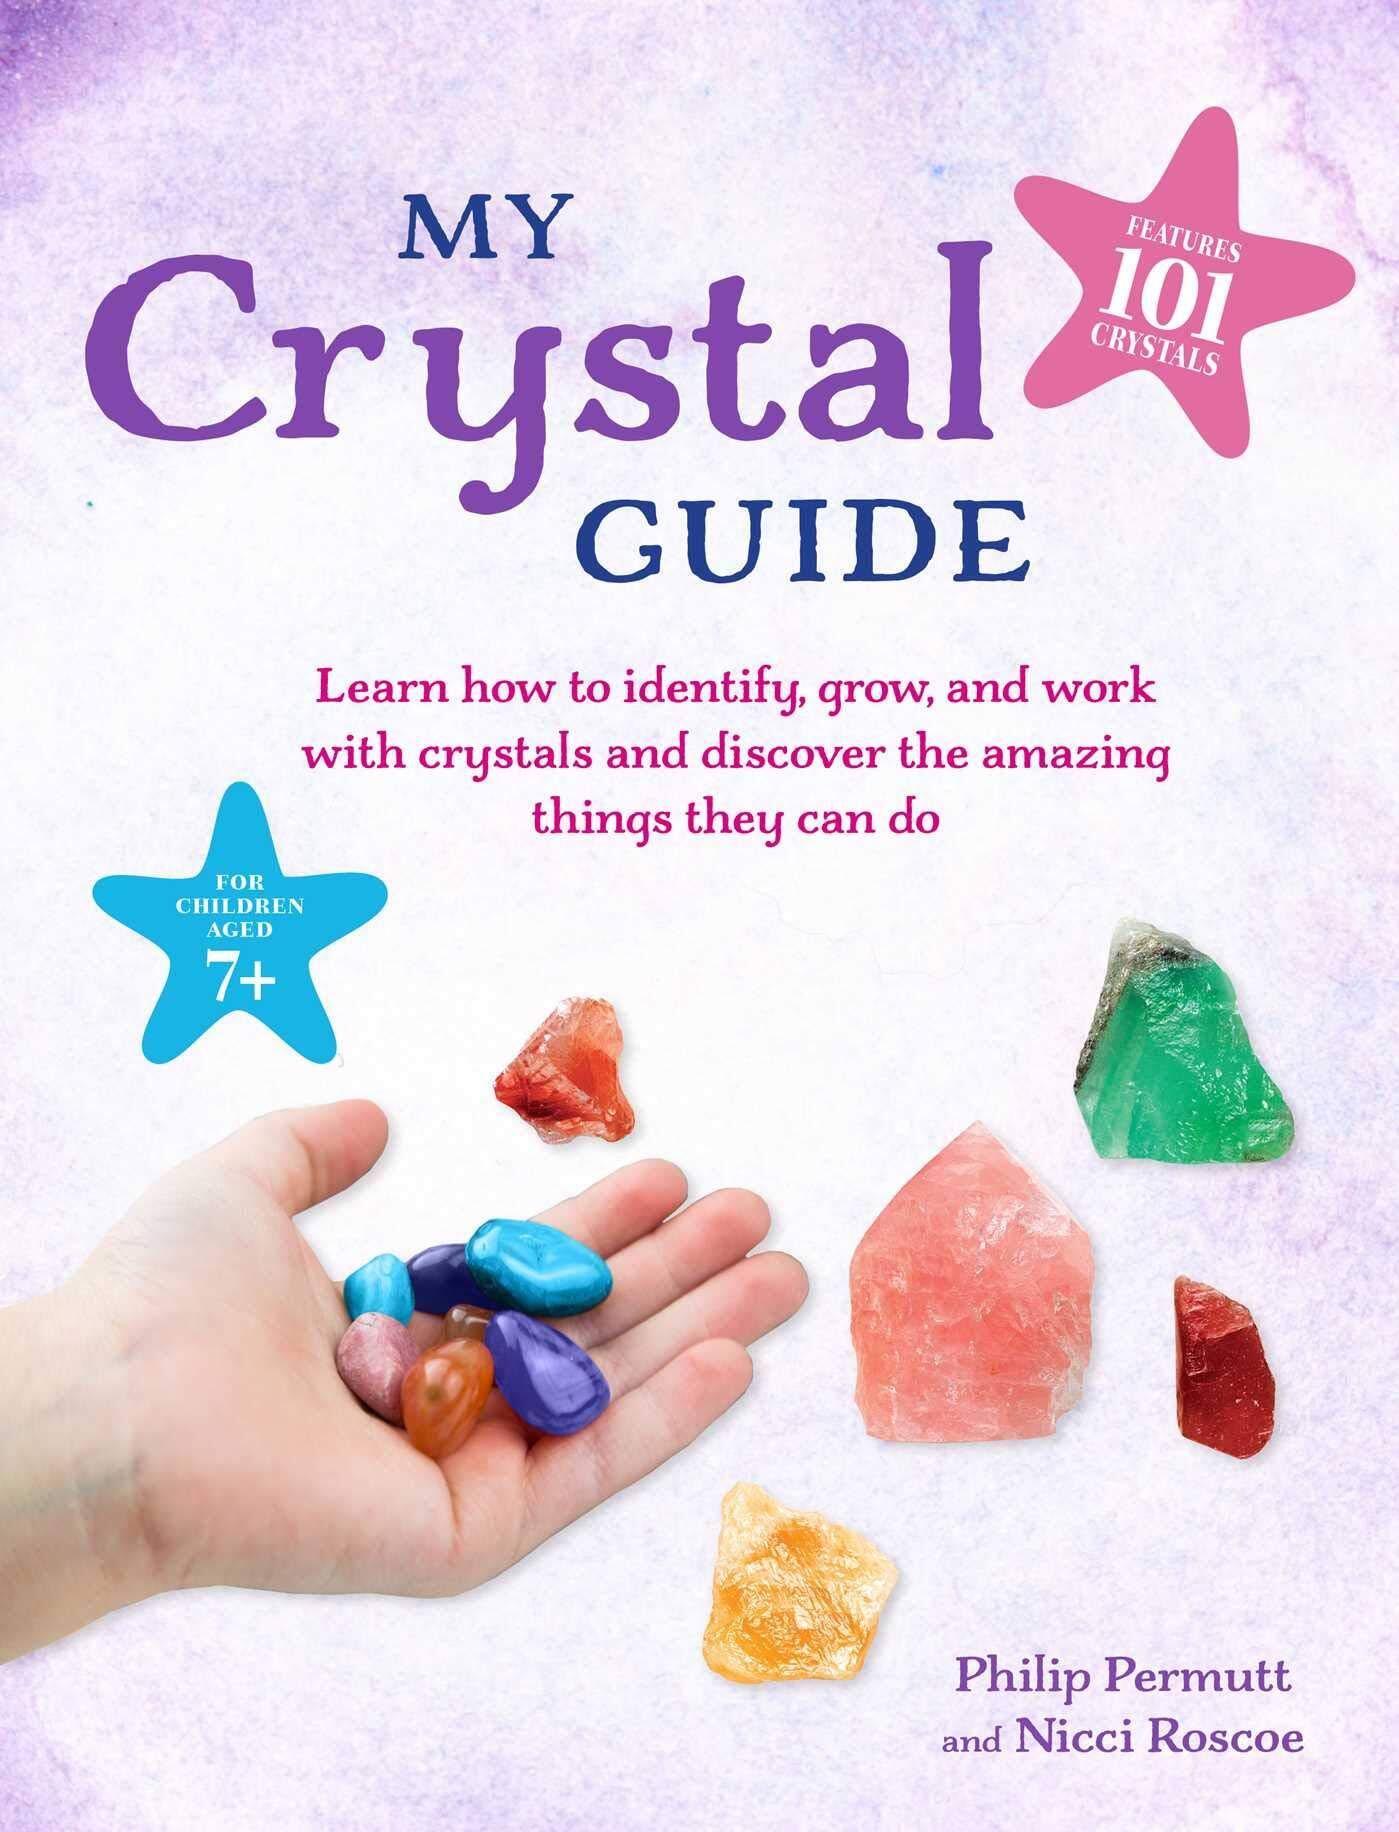 My Crystal Guide: Learn how to identify, grow, and work with crystals and discover the amazing things they can do - for children aged 7+